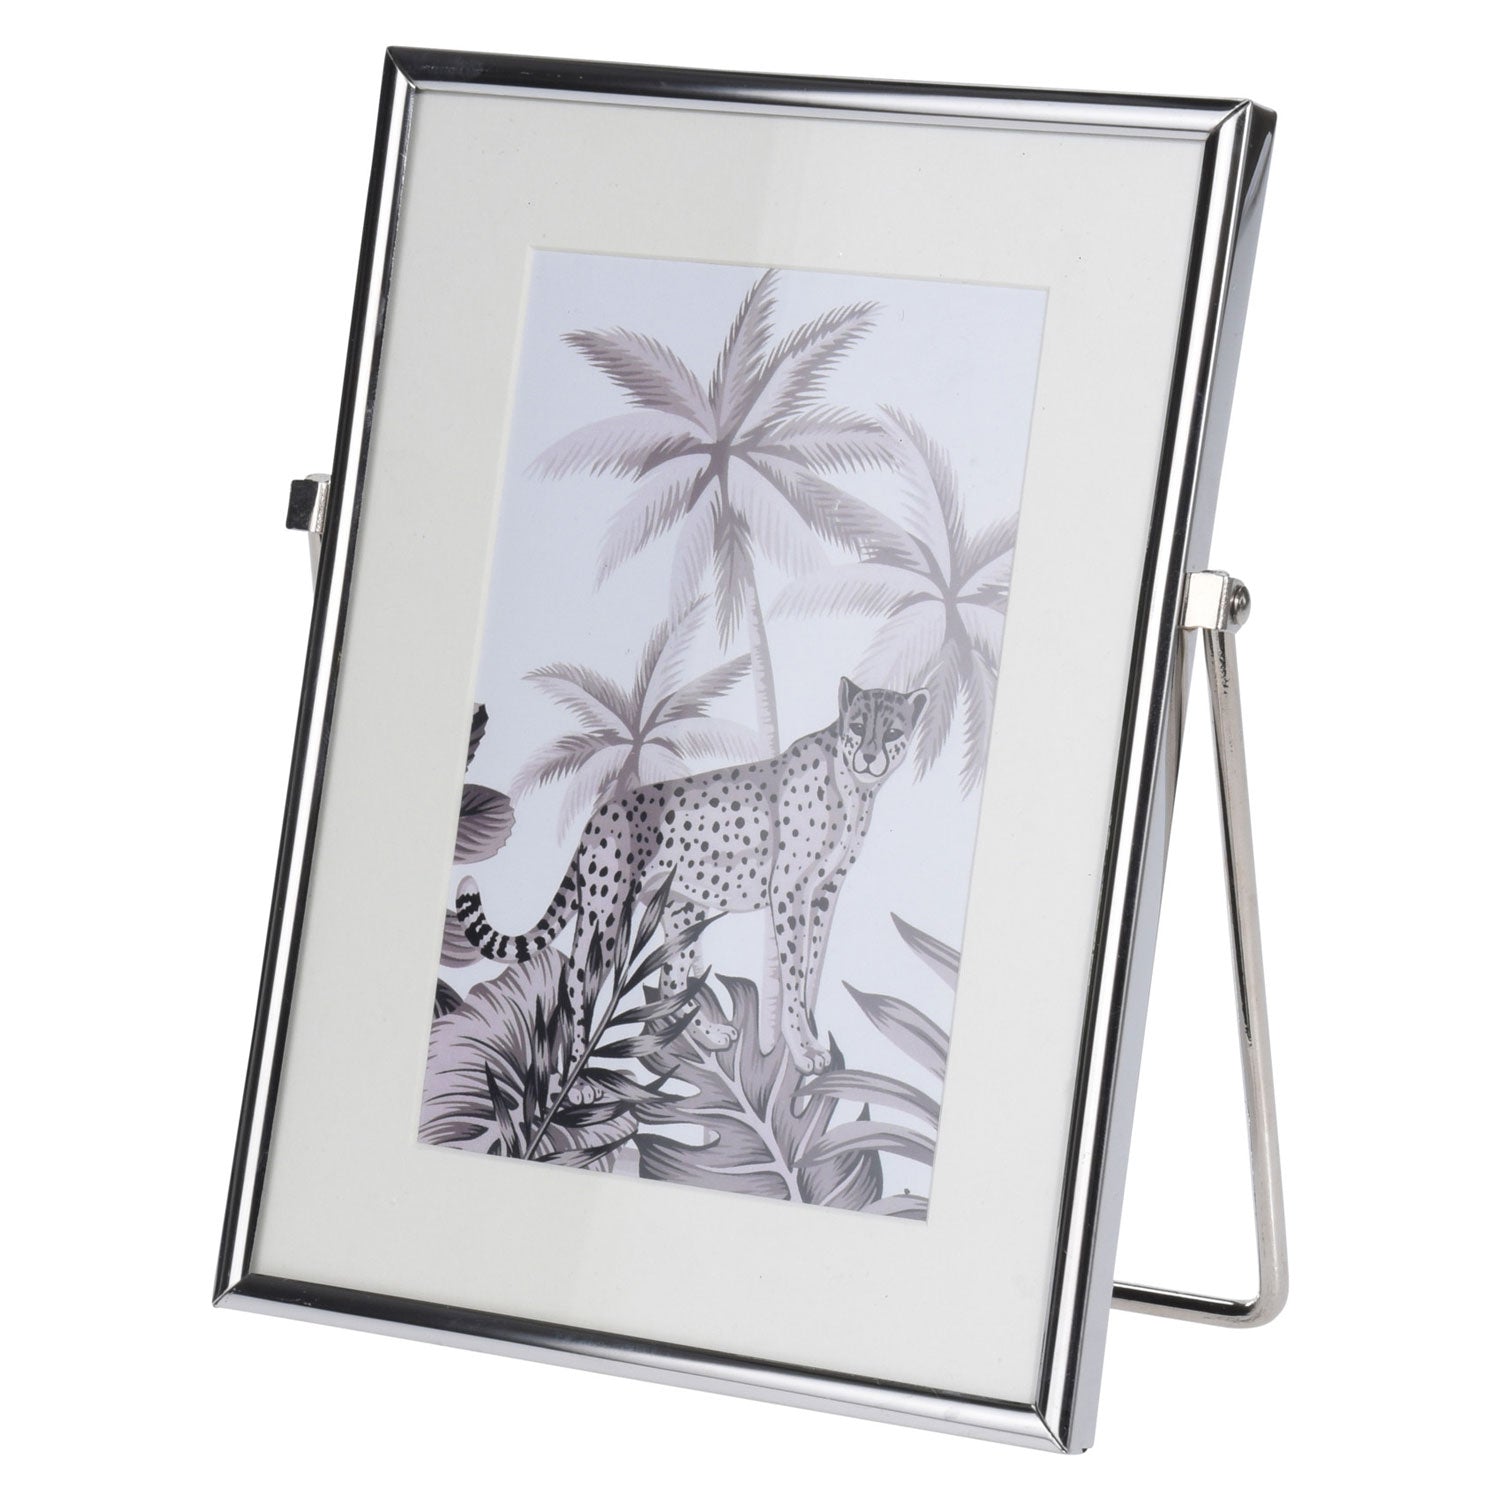 The Home Silver Photo Frame 1 Shaws Department Stores